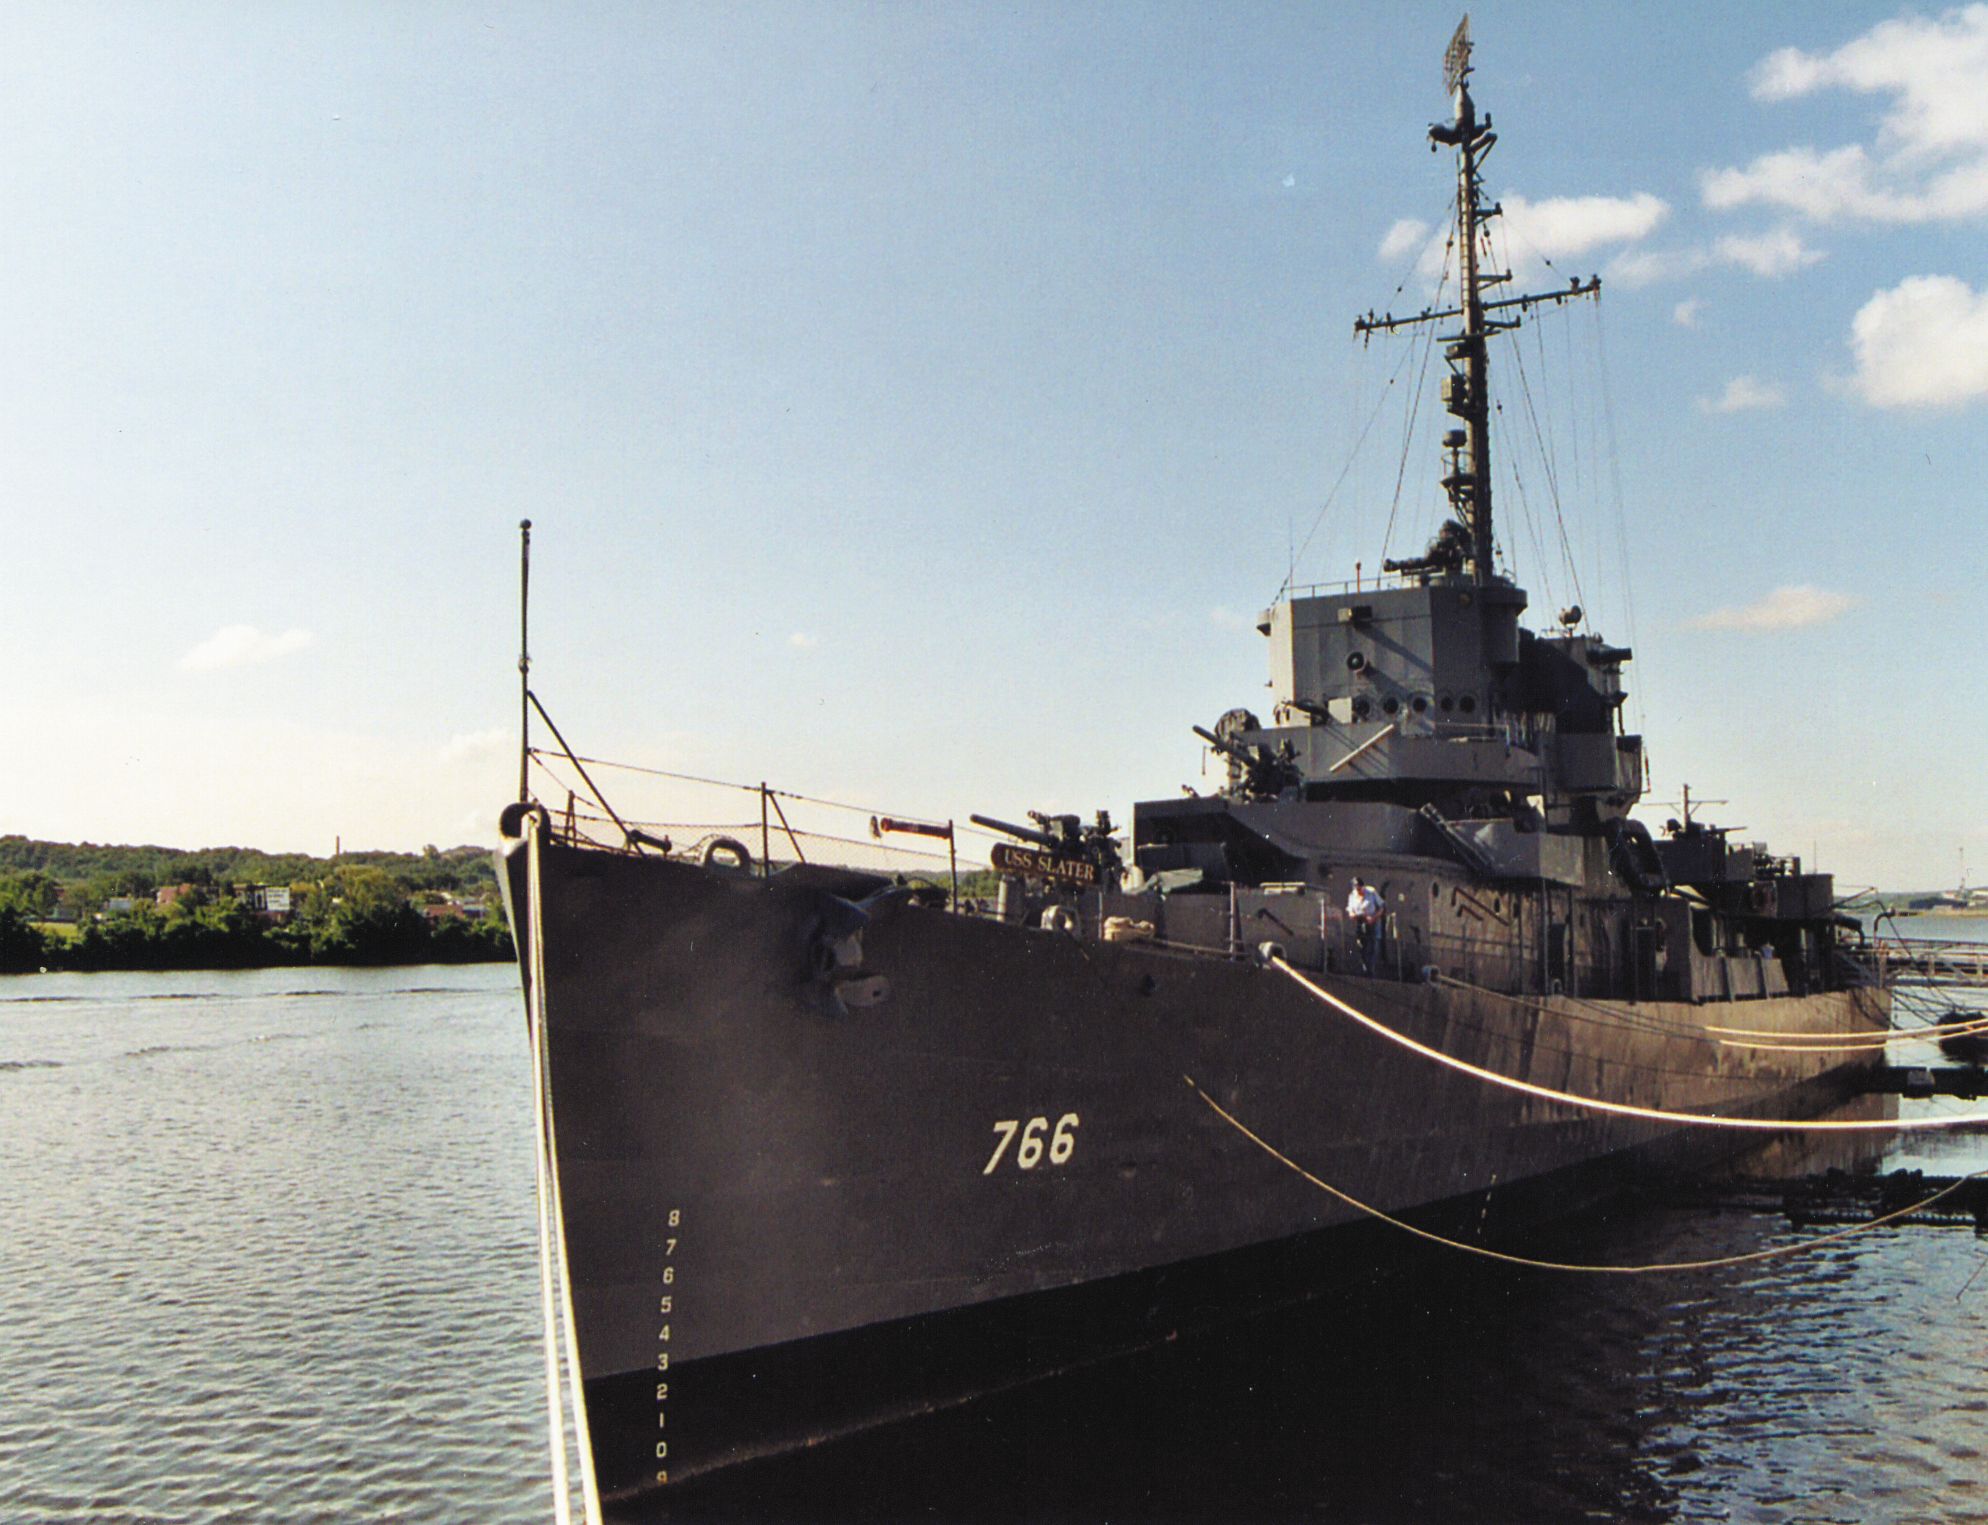 The destroyer escort USS Slater, moored in Albany, New York, as a floating museum, previously served with the Greek Navy as a training vessel before being brought back to the United States for restoration in the 1990s. (Paul B. Cora)